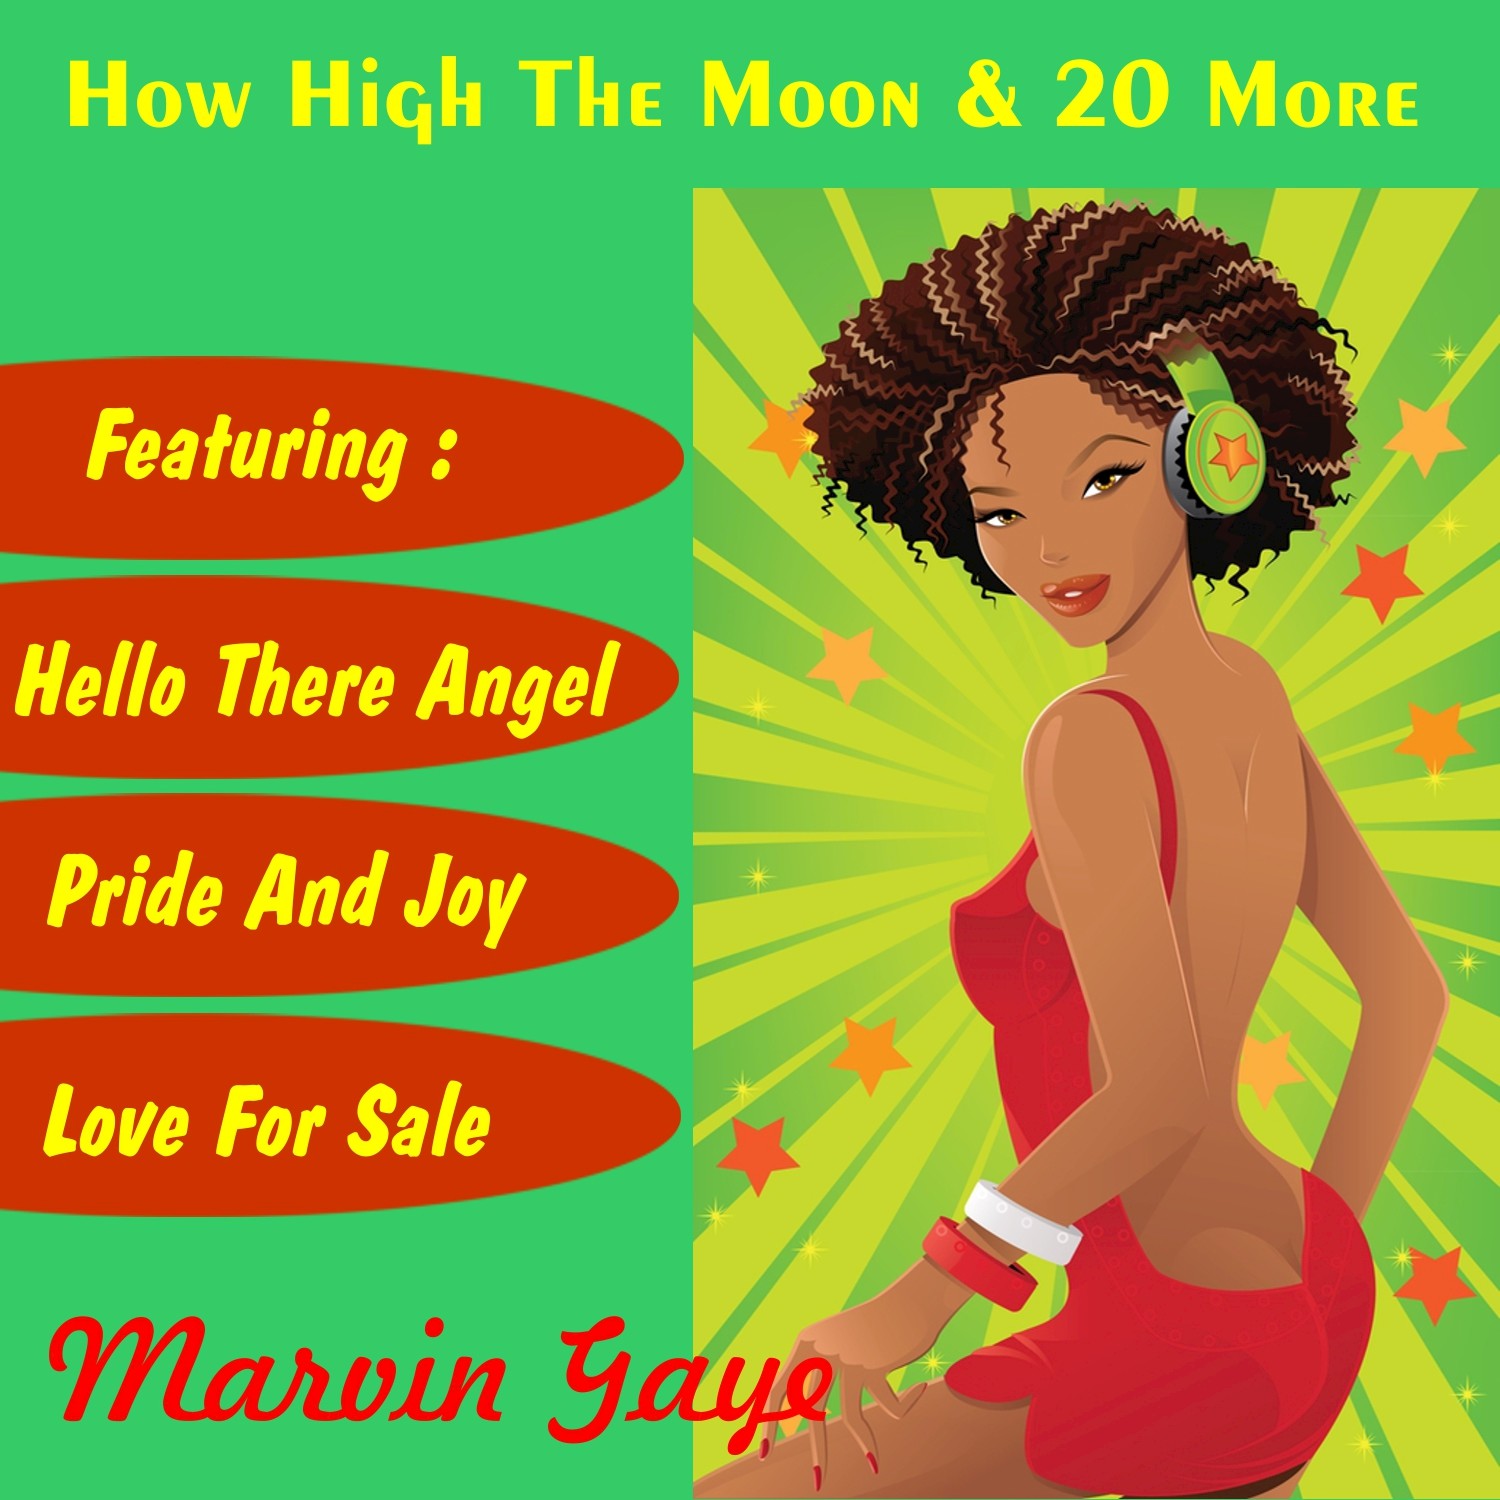 How High the Moon and 20 More